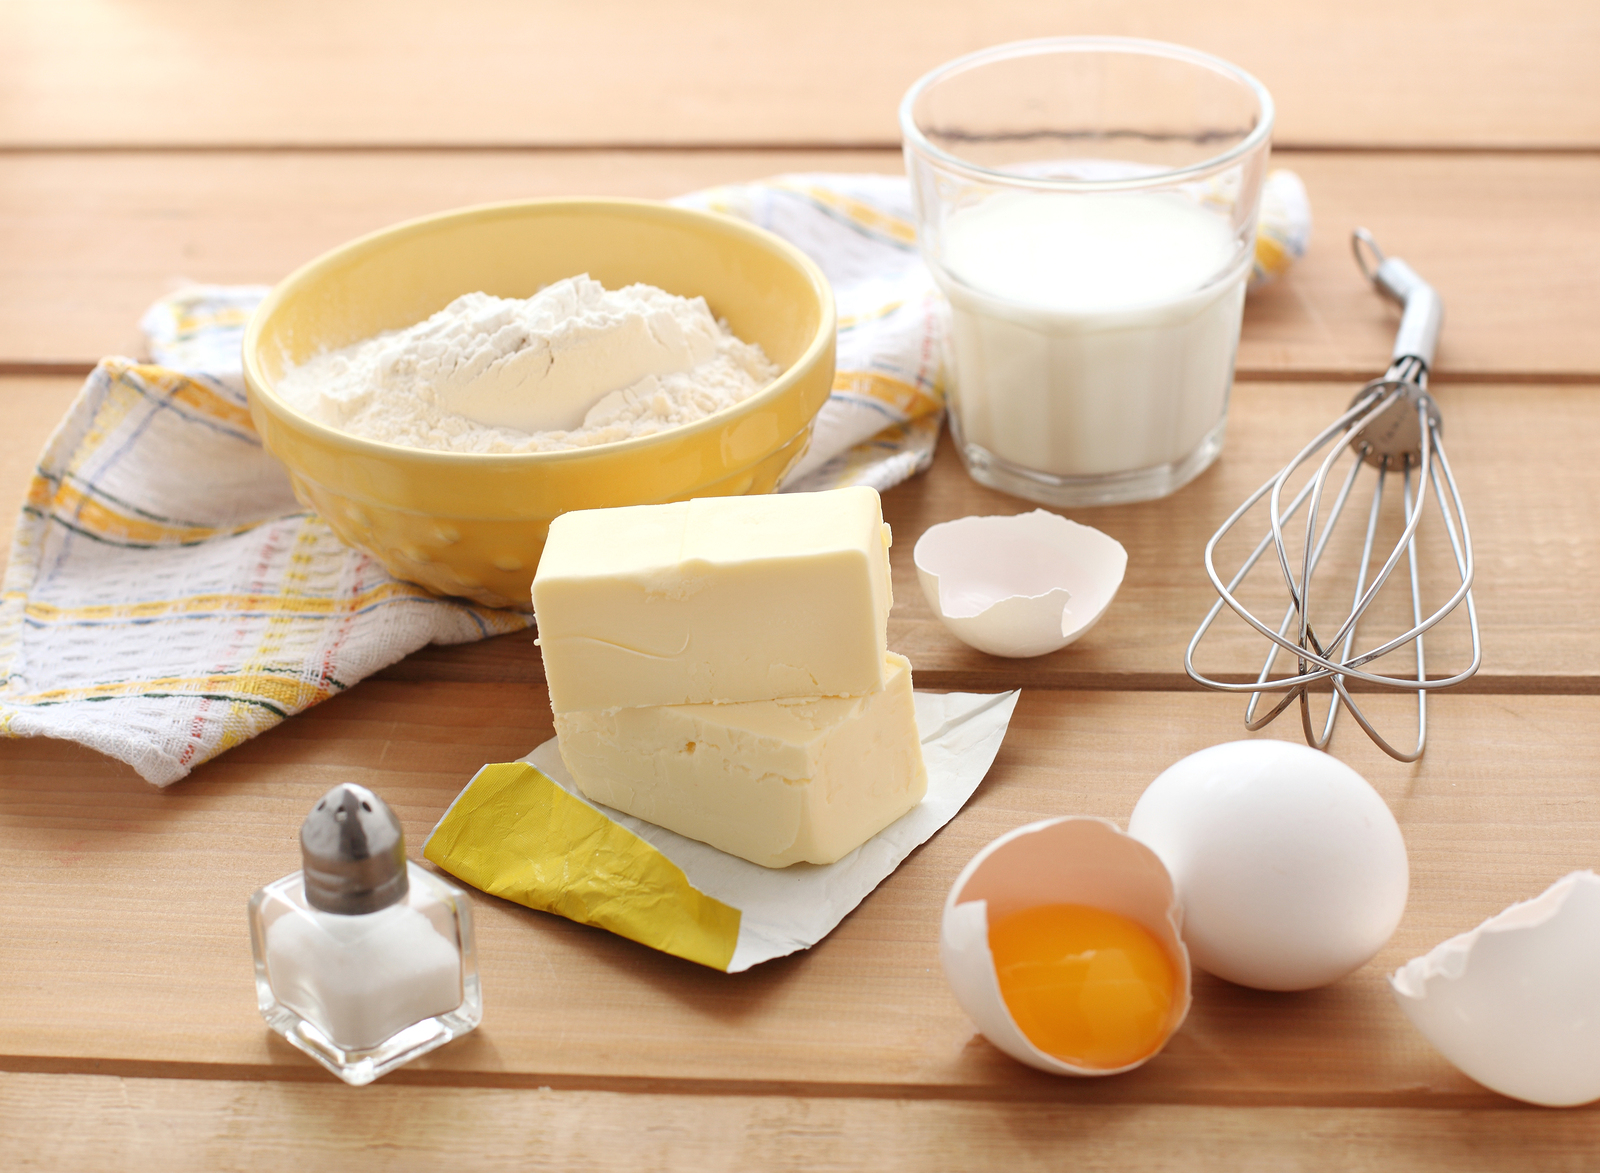 The Basic Baking Ingredients You Should Always Have